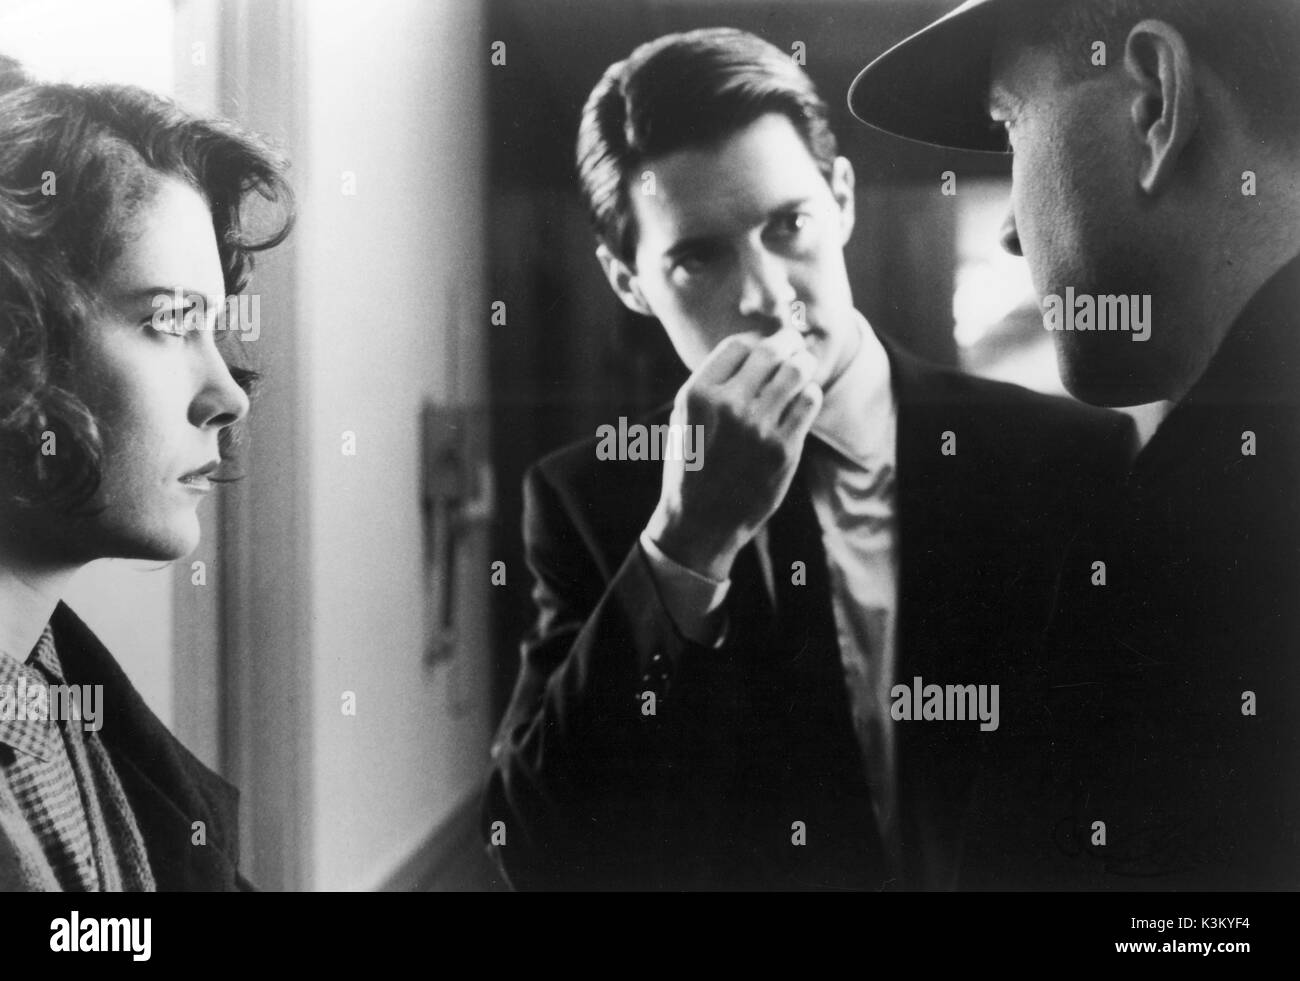 Dale cooper twin peaks Black and White Stock Photos & Images - Alamy